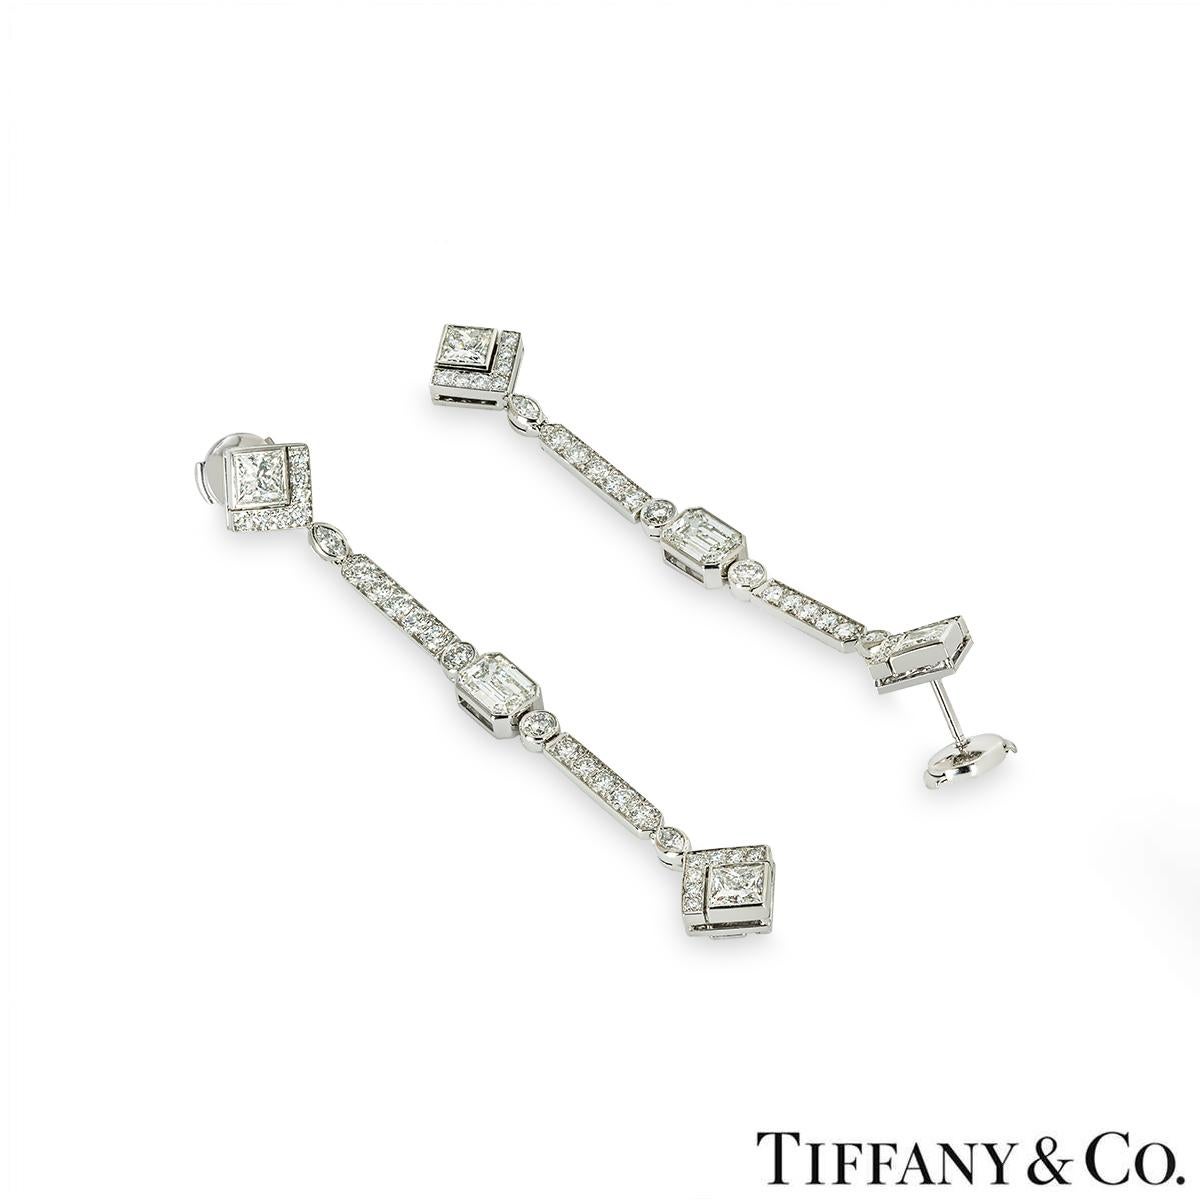 Tiffany & Co. Platinum Diamond Drop Earrings In Excellent Condition For Sale In London, GB